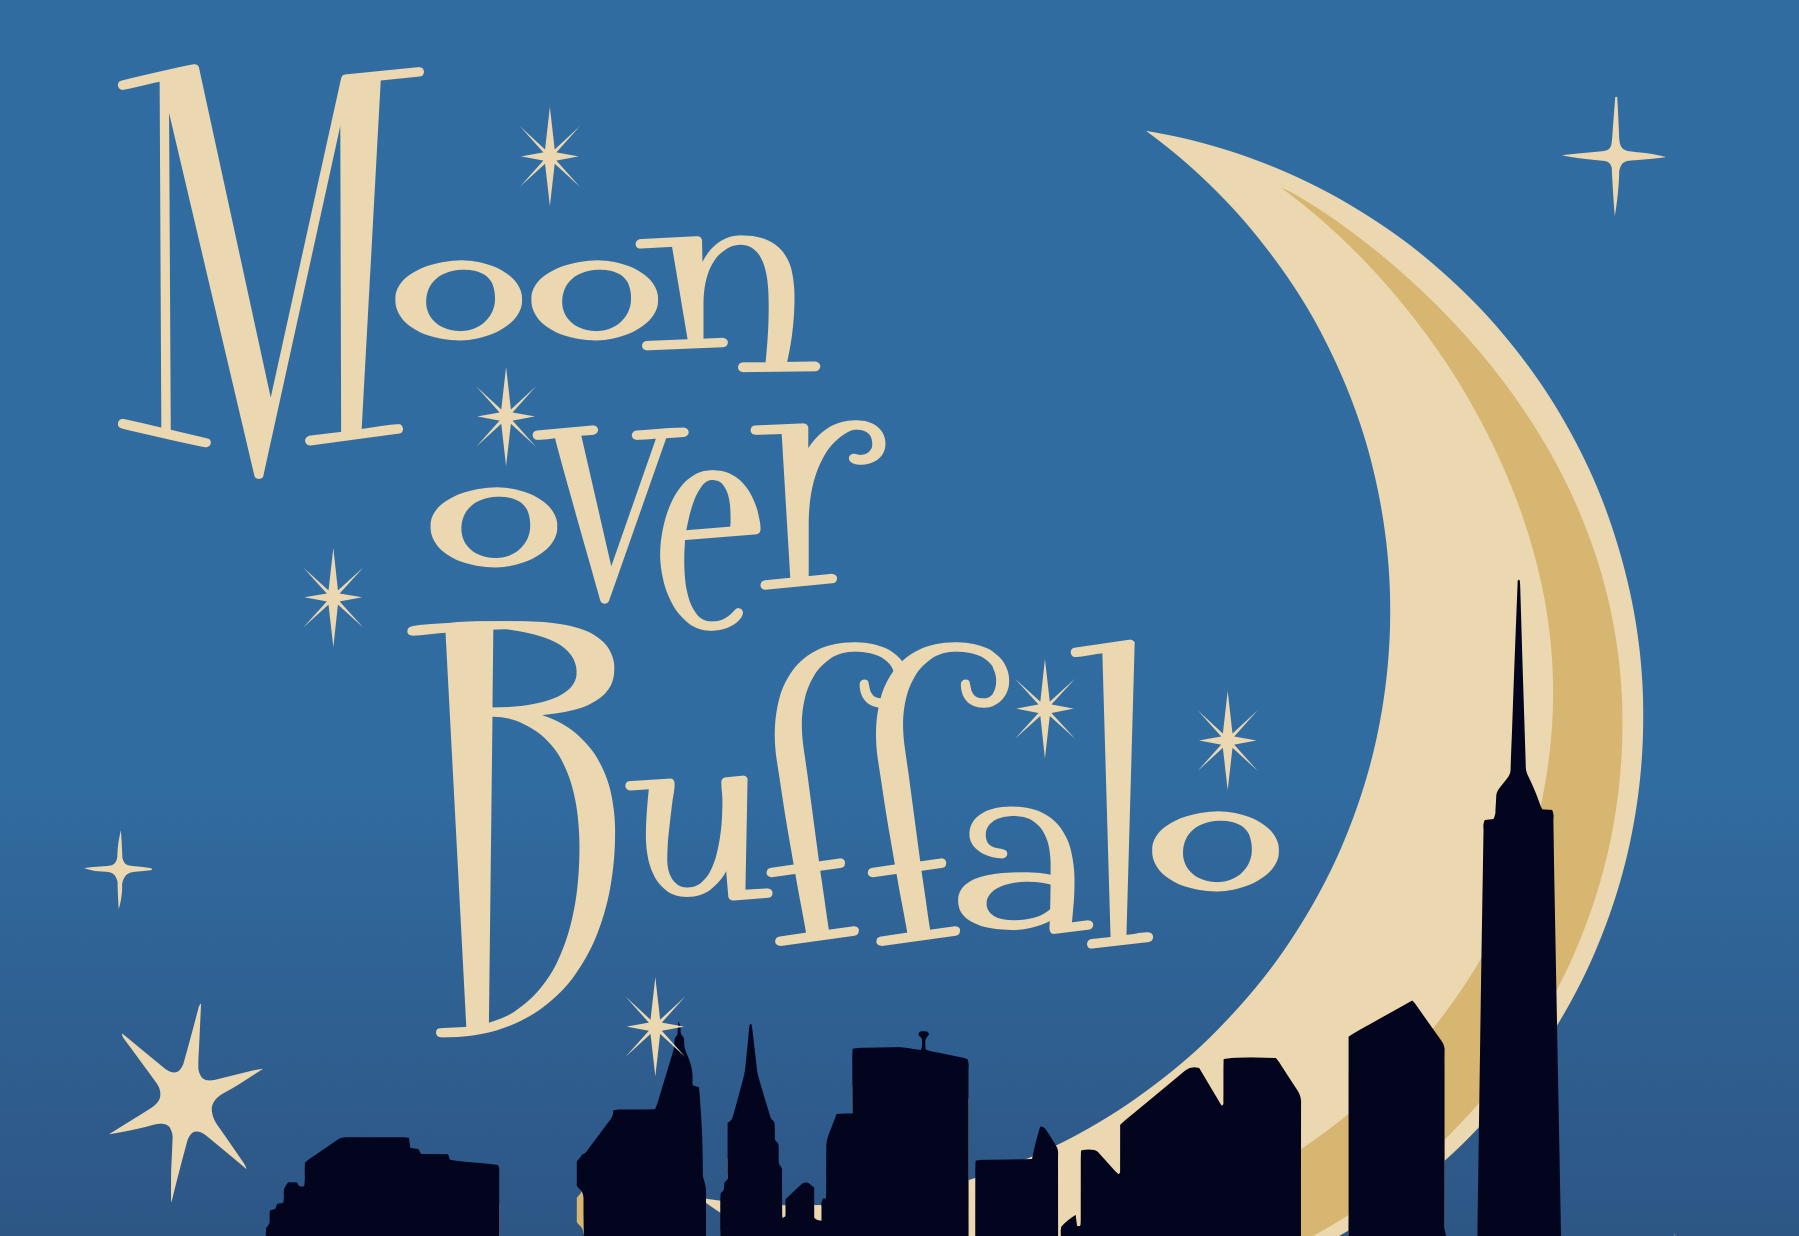 Saint Vincent Summer Theatre continues Tuesday with “Moon Over Buffalo”